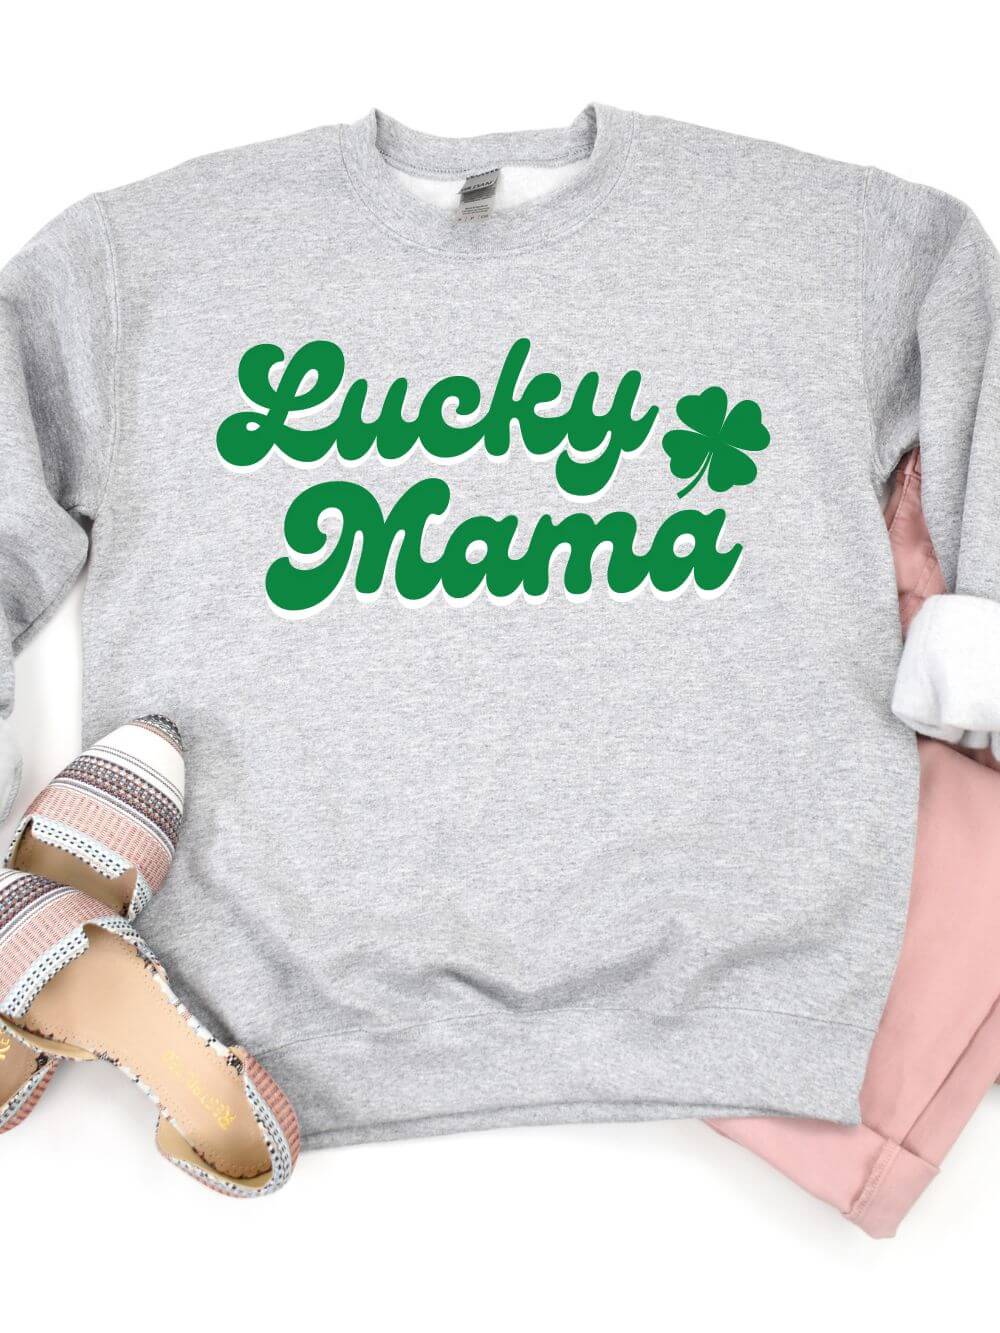 One Lucky Mama, Mom's St. Patrick's Day Apparel